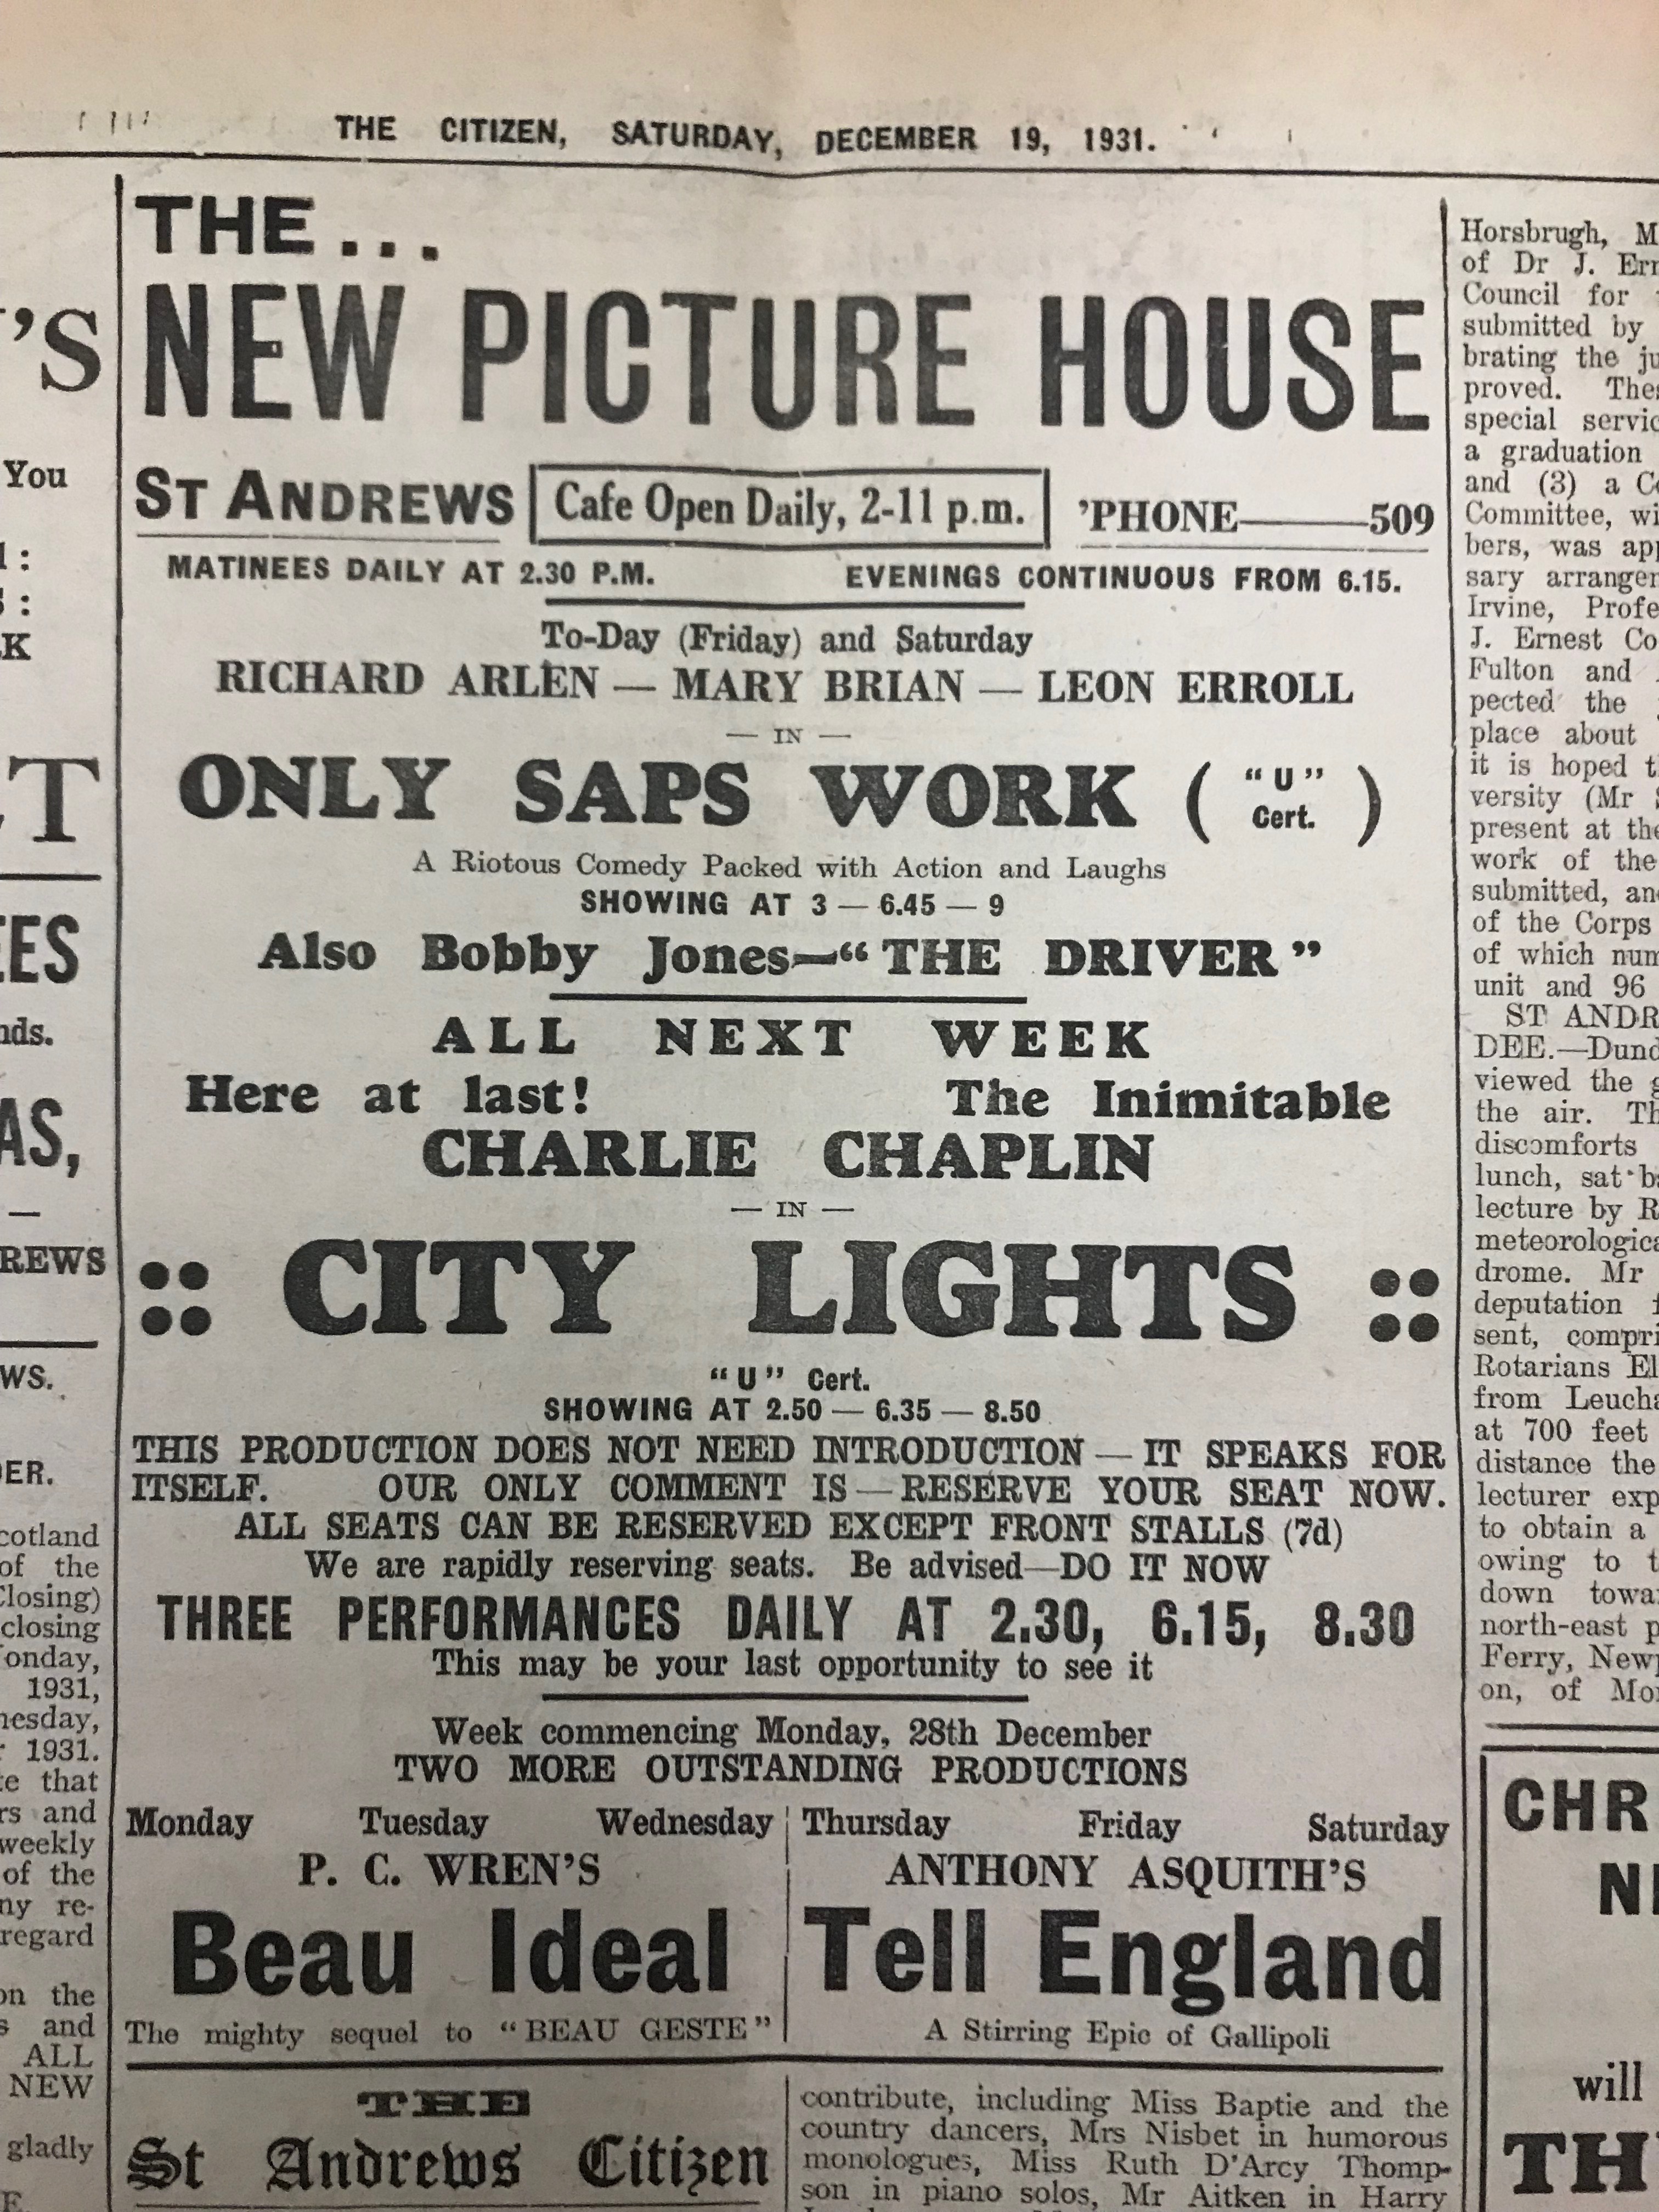 Advert for Chaplin's "City Lights" in The Citizen 1931